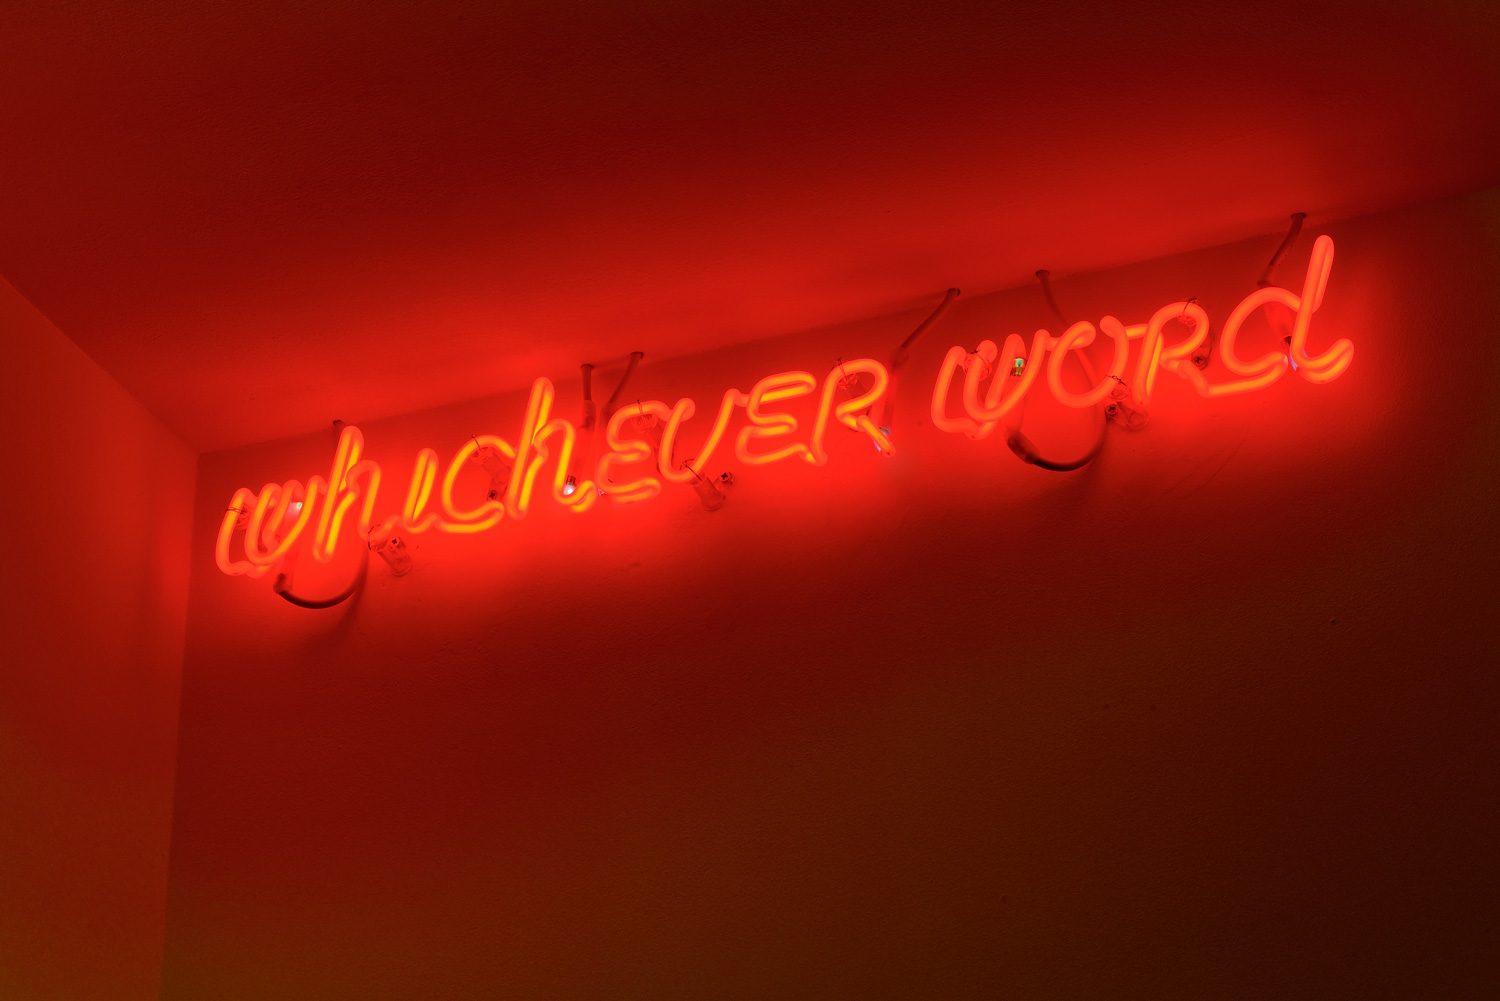 whichever word, 2012 - Vue suppl&eacute;mentaire